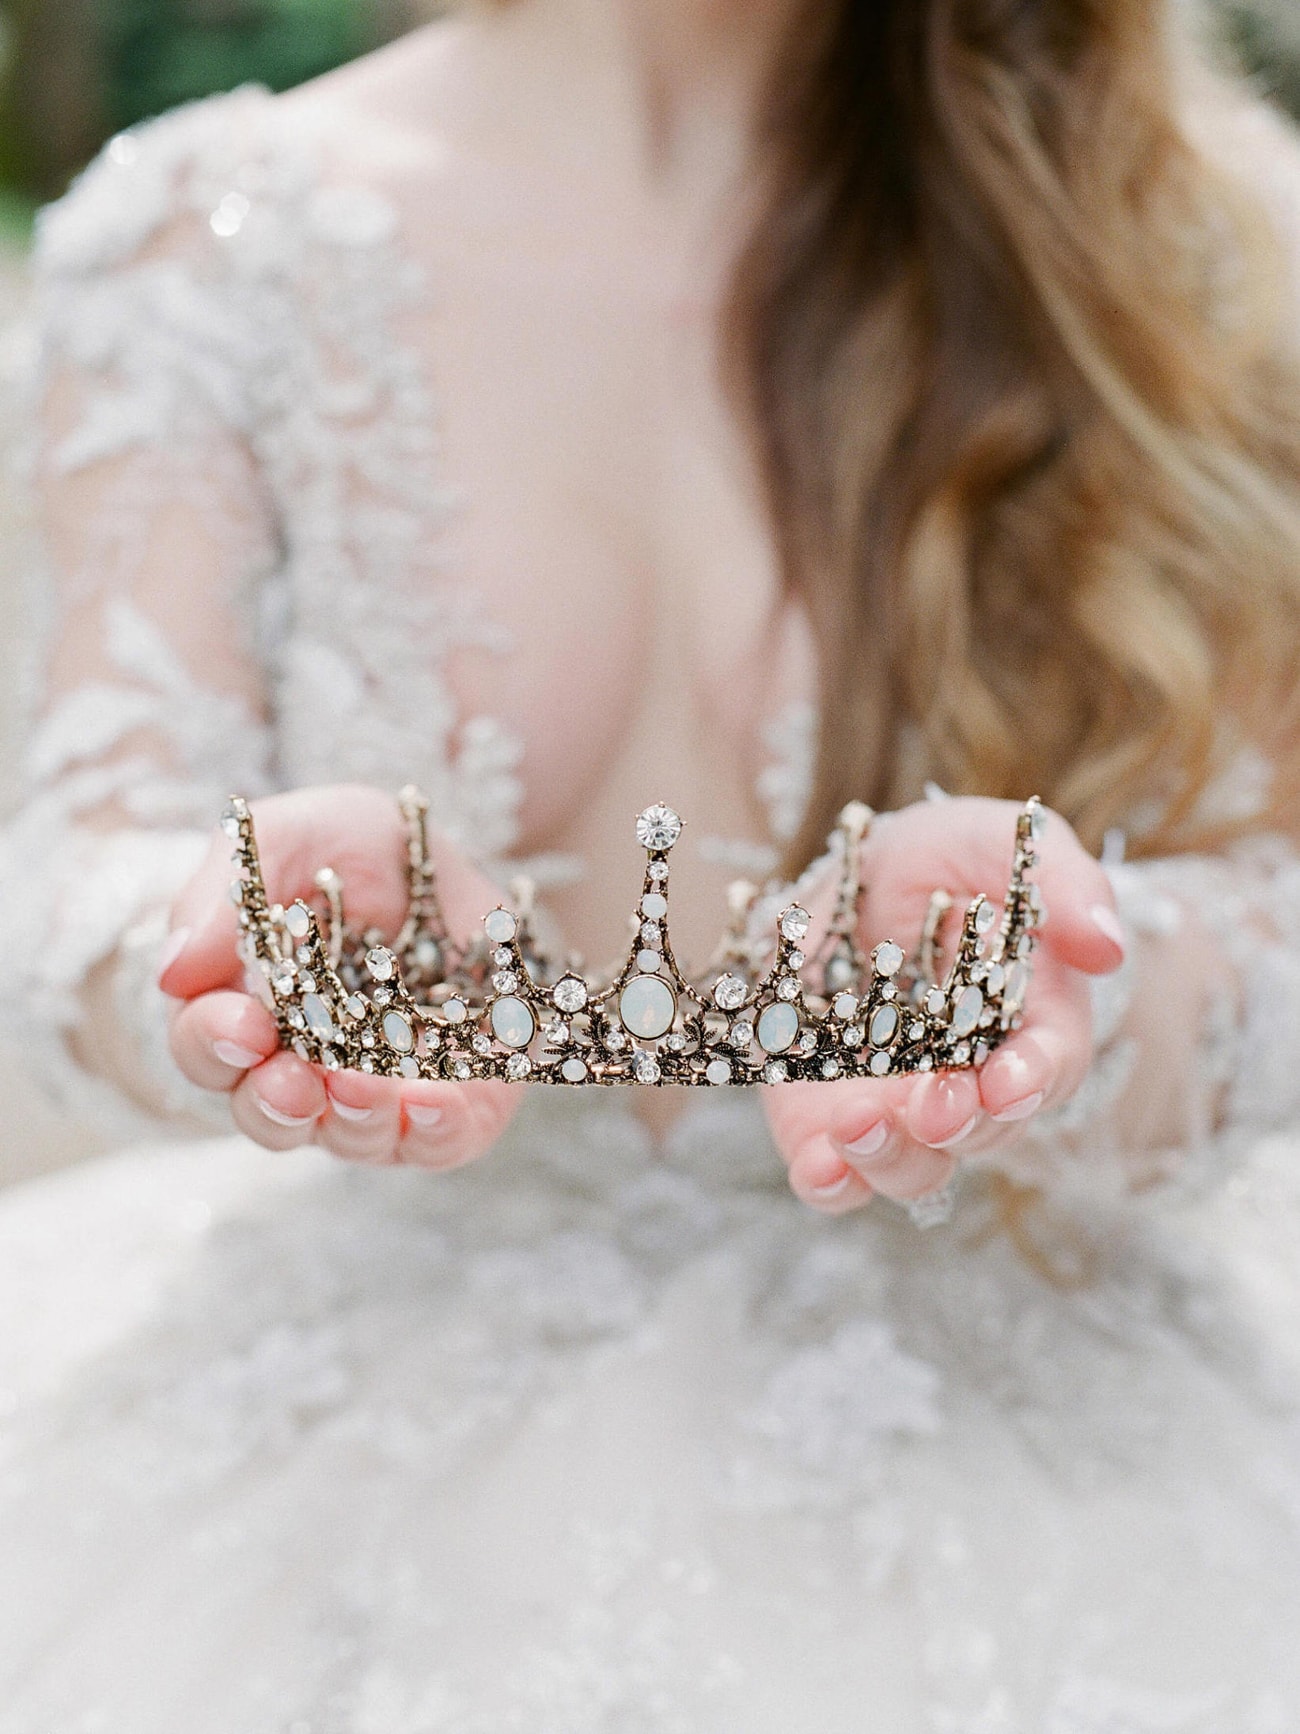 Fairytale Bridal Crowns & Tiaras from Eden Luxe Bridal | SouthBound Bride